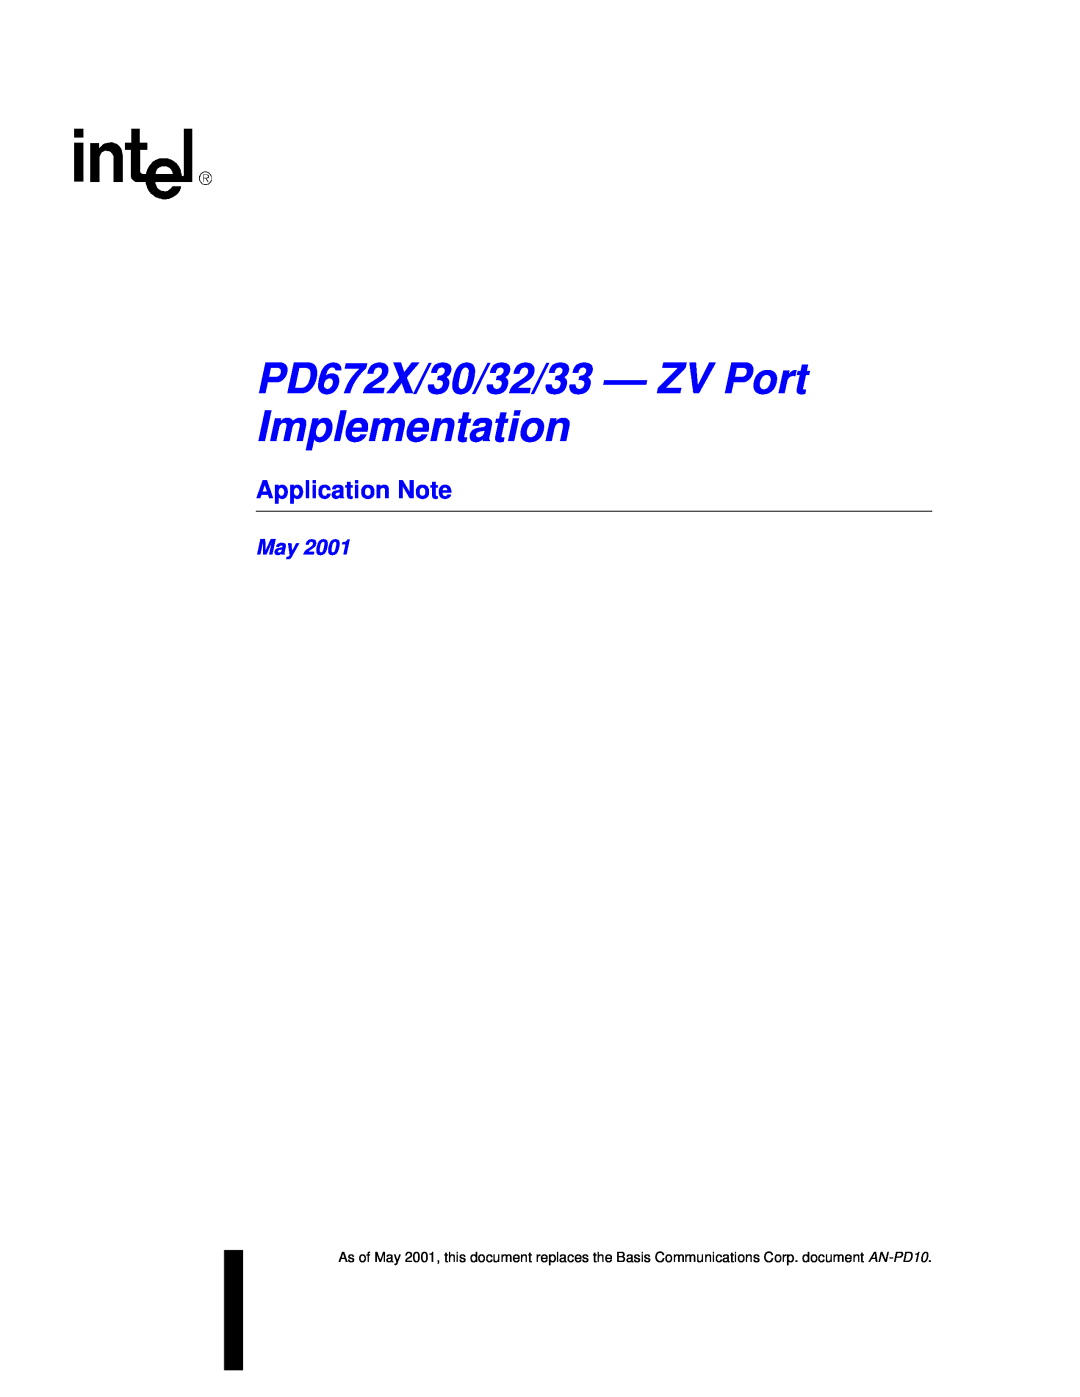 Intel manual PD672X/30/32/33 - ZV Port Implementation, Application Note 